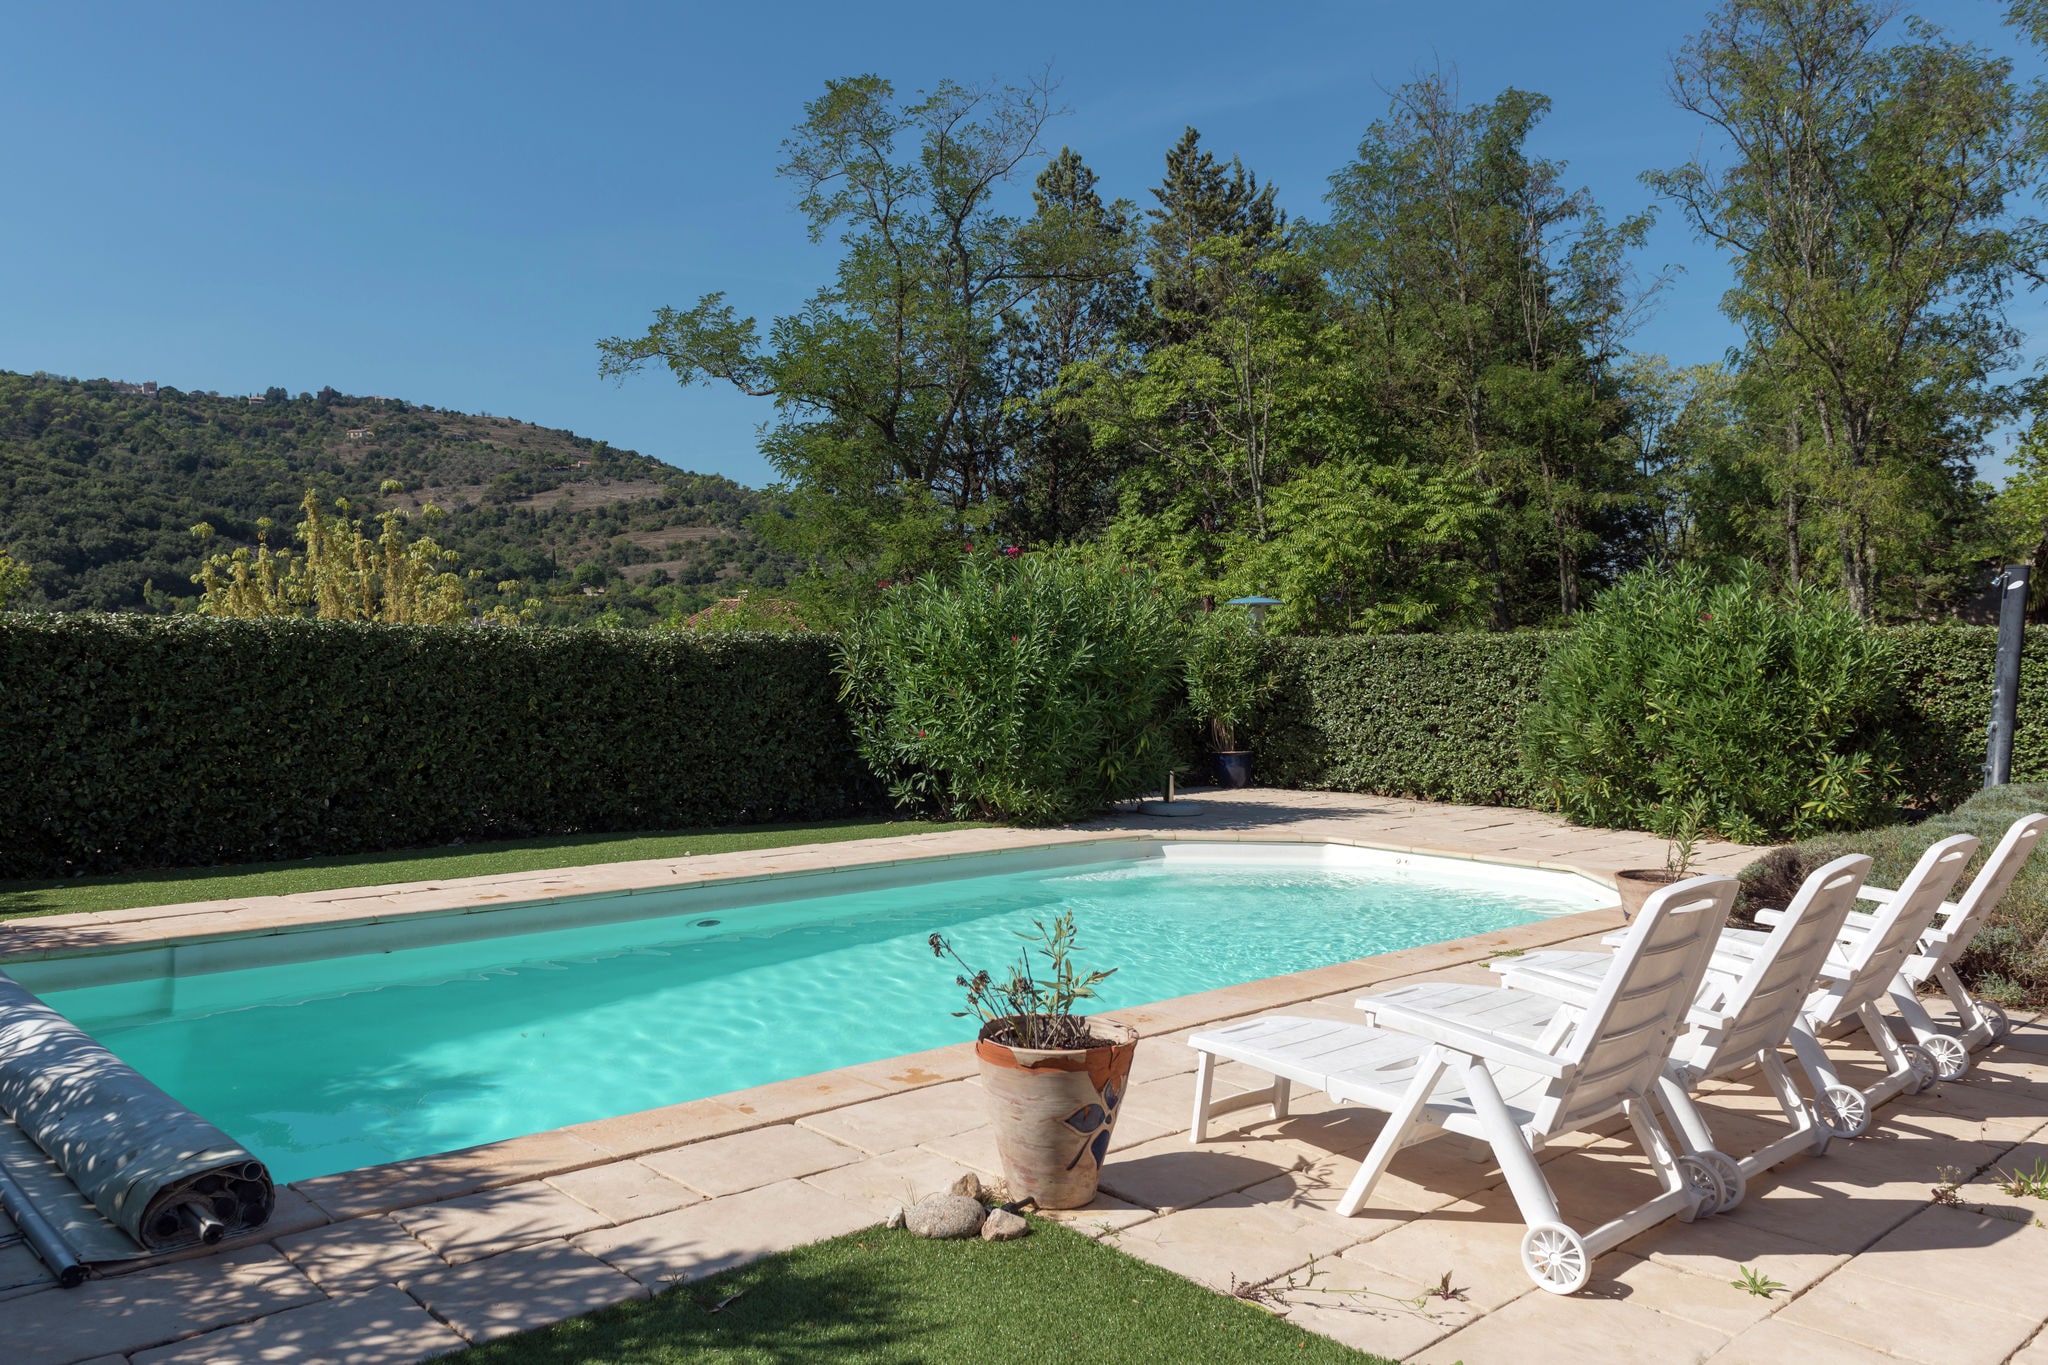 Sun drenched villa in Ardeche with Pool